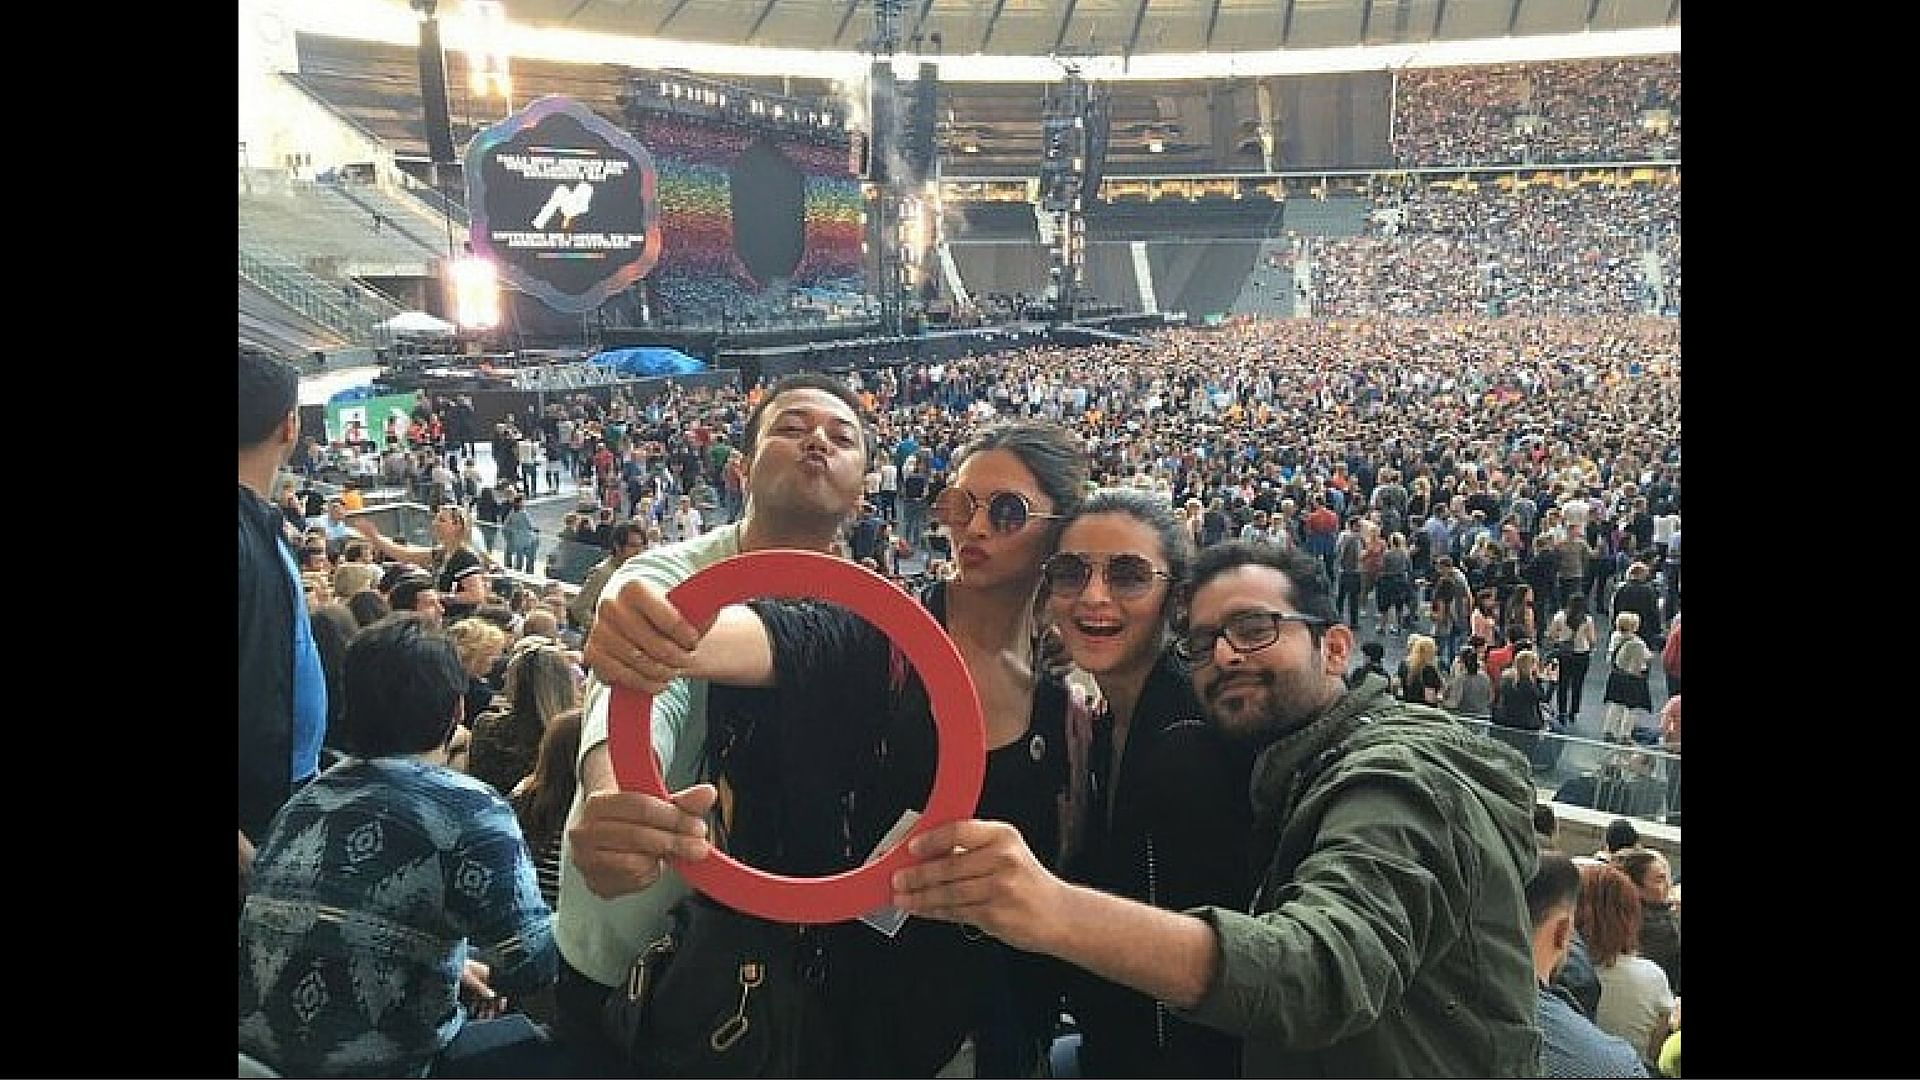 Deepika Padukone and Alia Bhatt at the Coldplay concert with director Shakun Batra (Photo Courtesy: <a href="https://twitter.com/search?f=images&amp;vertical=news&amp;q=deepika%20coldplay&amp;src=typd">Twitter/@DeepikaPFC</a>)